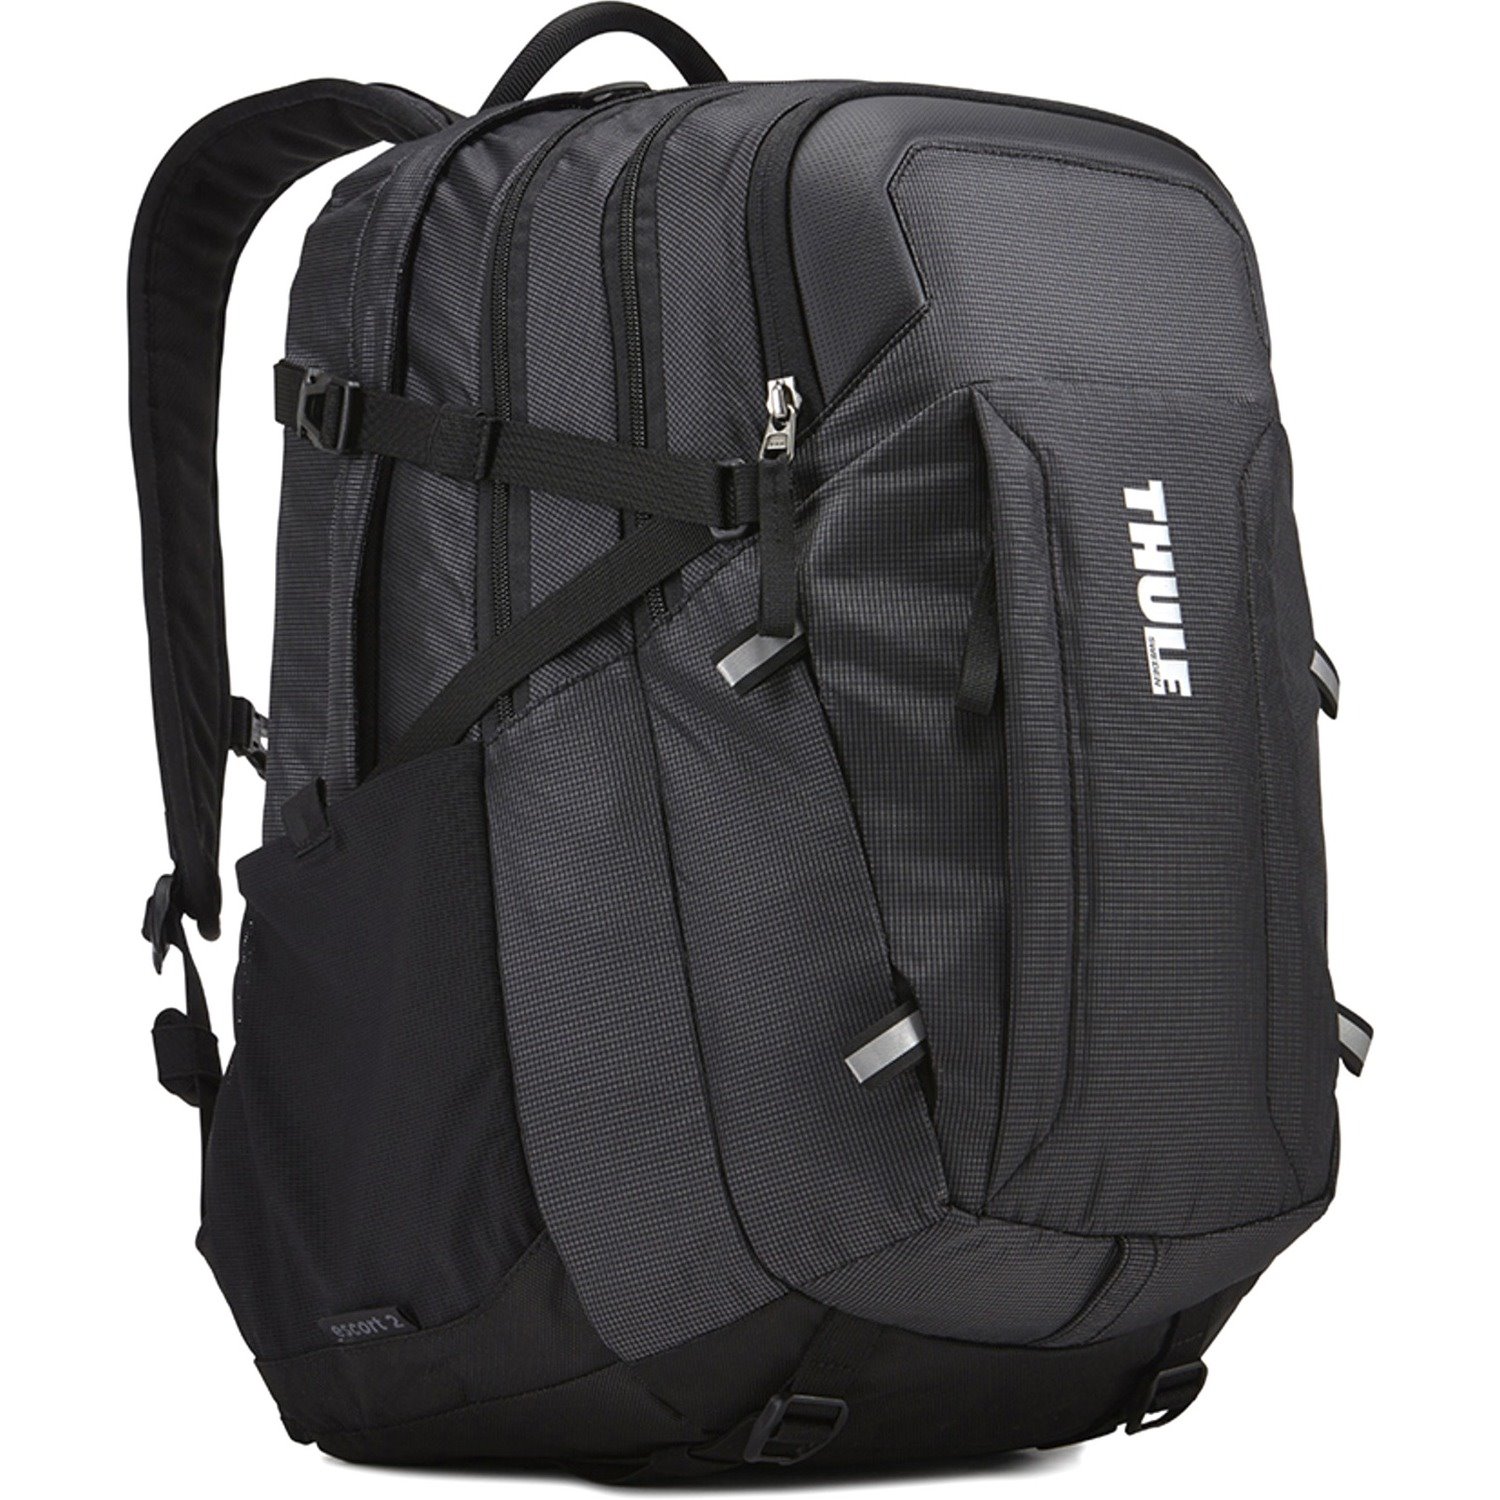 Thule EnRoute Escort 2 TEED217 Carrying Case for 15" to 15.6" Notebook, Gear, Tablet PC - Black